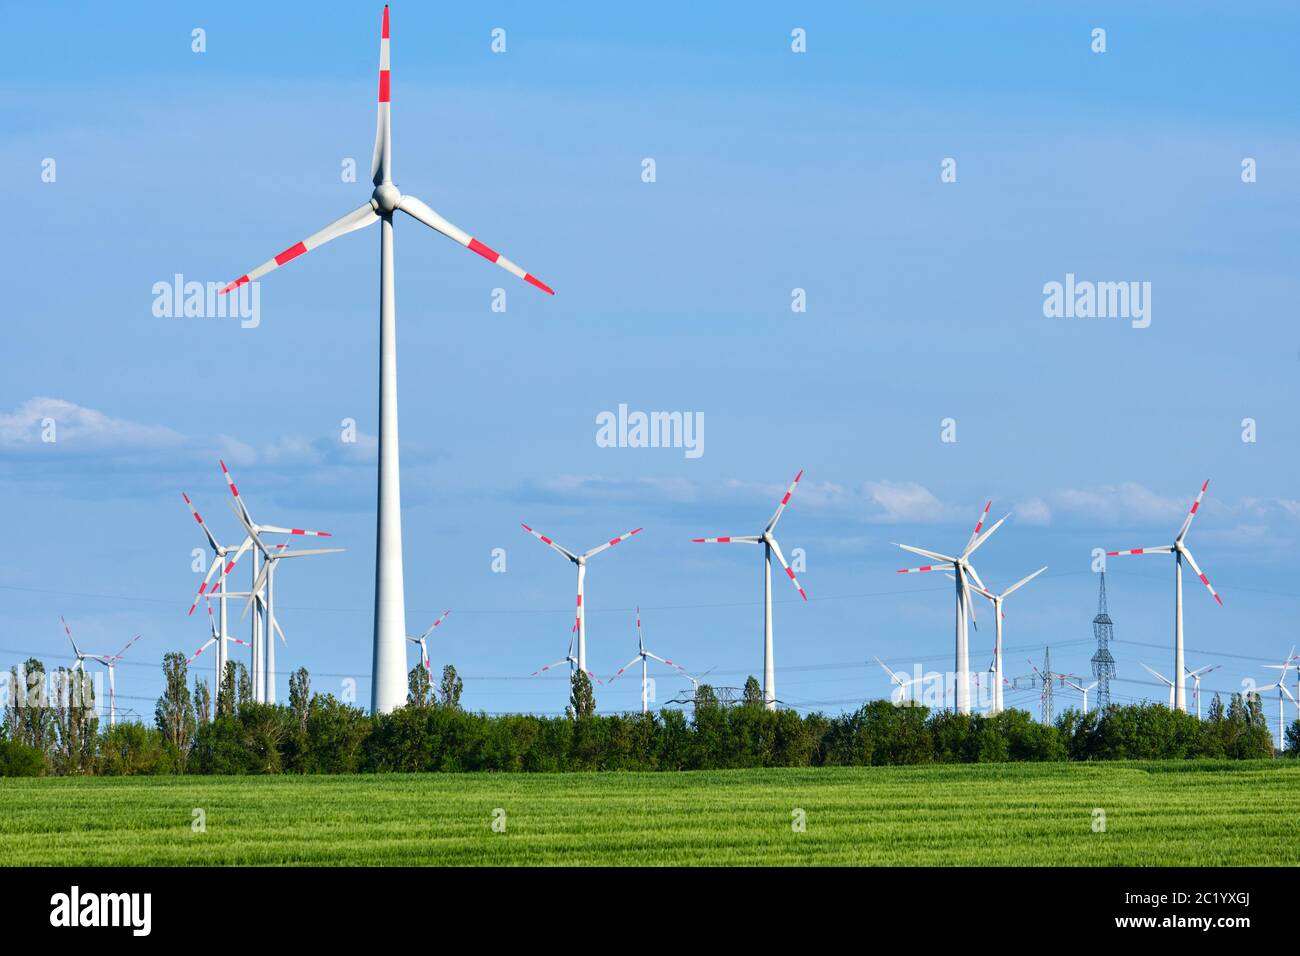 Wind energy in an agricultural area seen in Germany Stock Photo